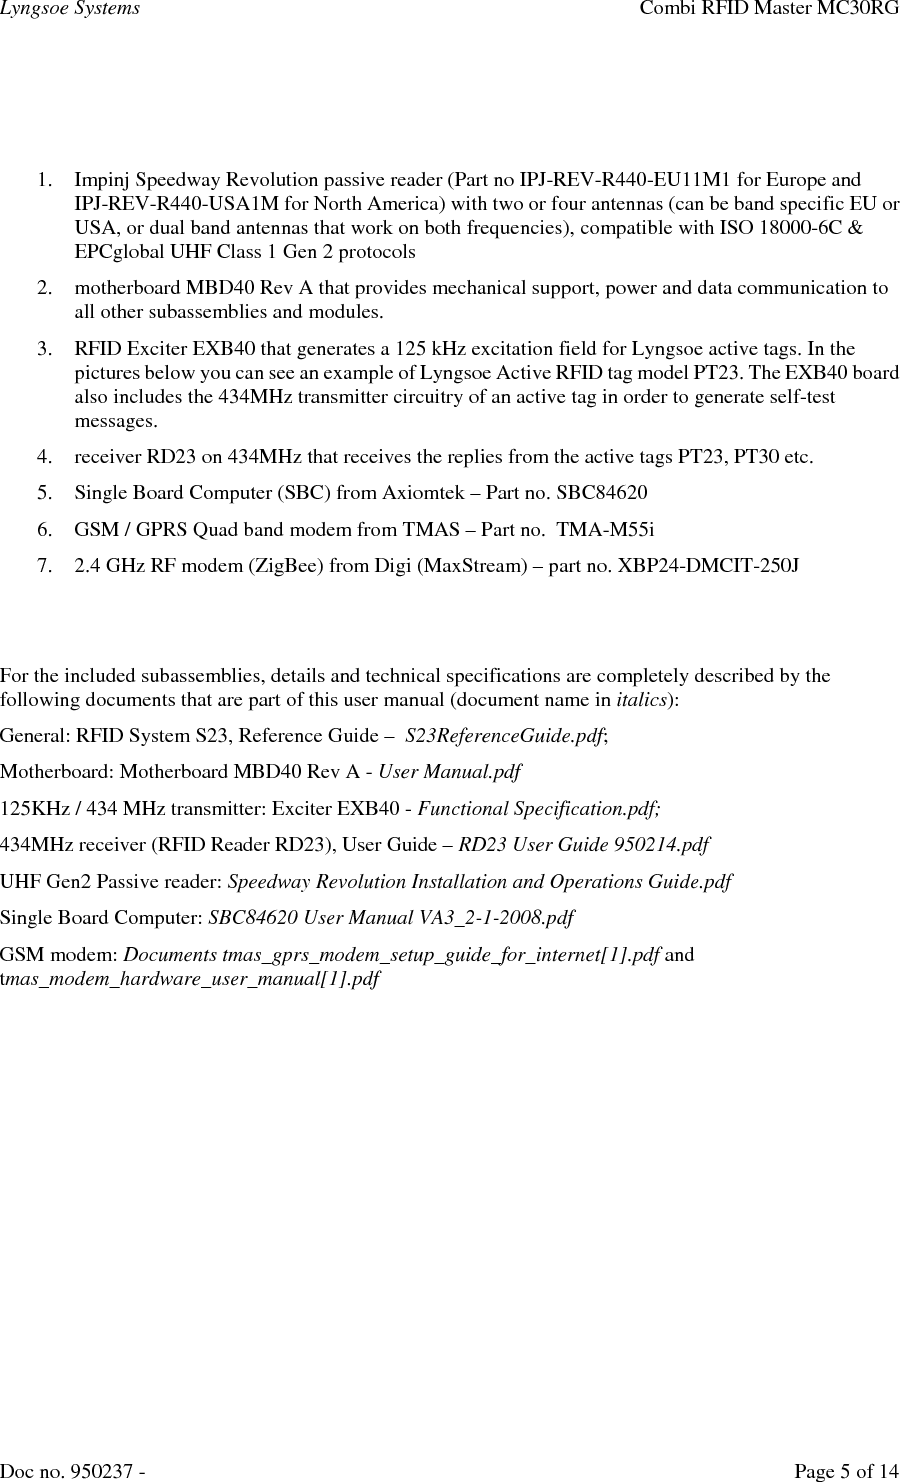 Lyngsoe Systems    Combi RFID Master MC30RG Doc no. 950237 -     Page 5 of 14    1. Impinj Speedway Revolution passive reader (Part no IPJ-REV-R440-EU11M1 for Europe and IPJ-REV-R440-USA1M for North America) with two or four antennas (can be band specific EU or USA, or dual band antennas that work on both frequencies), compatible with ISO 18000-6C &amp; EPCglobal UHF Class 1 Gen 2 protocols 2. motherboard MBD40 Rev A that provides mechanical support, power and data communication to all other subassemblies and modules. 3. RFID Exciter EXB40 that generates a 125 kHz excitation field for Lyngsoe active tags. In the pictures below you can see an example of Lyngsoe Active RFID tag model PT23. The EXB40 board also includes the 434MHz transmitter circuitry of an active tag in order to generate self-test messages. 4. receiver RD23 on 434MHz that receives the replies from the active tags PT23, PT30 etc. 5. Single Board Computer (SBC) from Axiomtek – Part no. SBC84620 6. GSM / GPRS Quad band modem from TMAS – Part no.  TMA-M55i 7. 2.4 GHz RF modem (ZigBee) from Digi (MaxStream) – part no. XBP24-DMCIT-250J   For the included subassemblies, details and technical specifications are completely described by the following documents that are part of this user manual (document name in italics): General: RFID System S23, Reference Guide –  S23ReferenceGuide.pdf; Motherboard: Motherboard MBD40 Rev A - User Manual.pdf 125KHz / 434 MHz transmitter: Exciter EXB40 - Functional Specification.pdf; 434MHz receiver (RFID Reader RD23), User Guide – RD23 User Guide 950214.pdf UHF Gen2 Passive reader: Speedway Revolution Installation and Operations Guide.pdf Single Board Computer: SBC84620 User Manual VA3_2-1-2008.pdf GSM modem: Documents tmas_gprs_modem_setup_guide_for_internet[1].pdf and tmas_modem_hardware_user_manual[1].pdf  